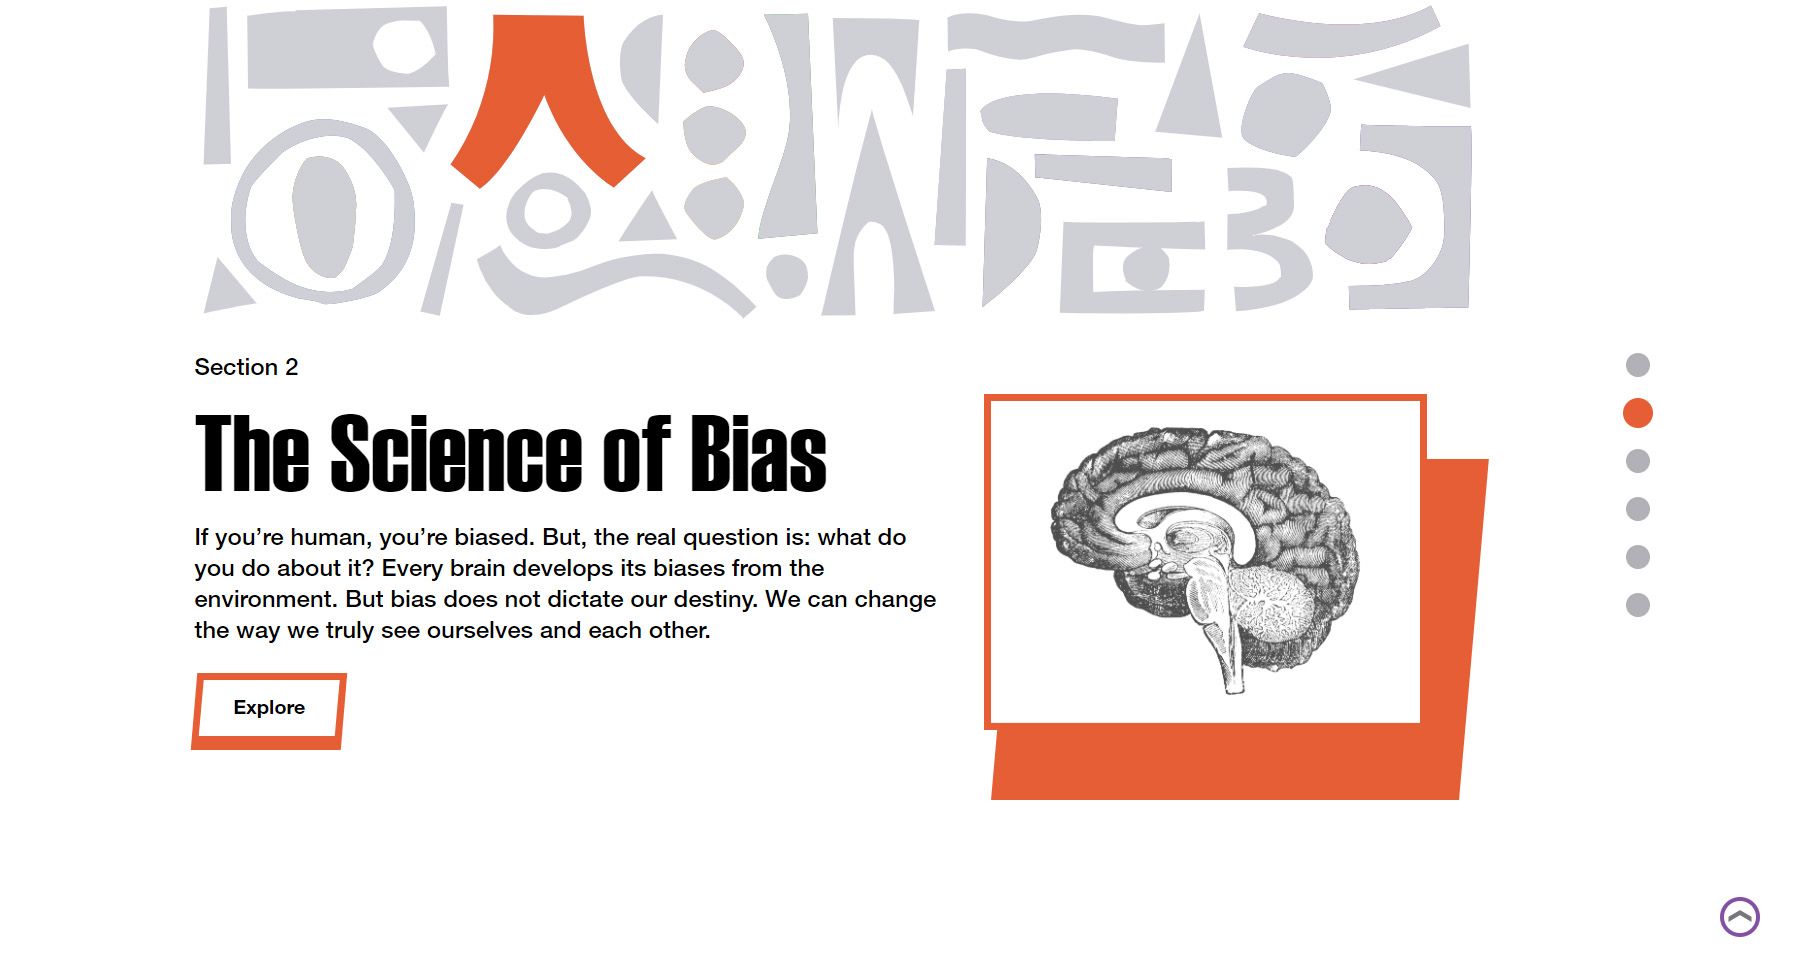 The science of bias